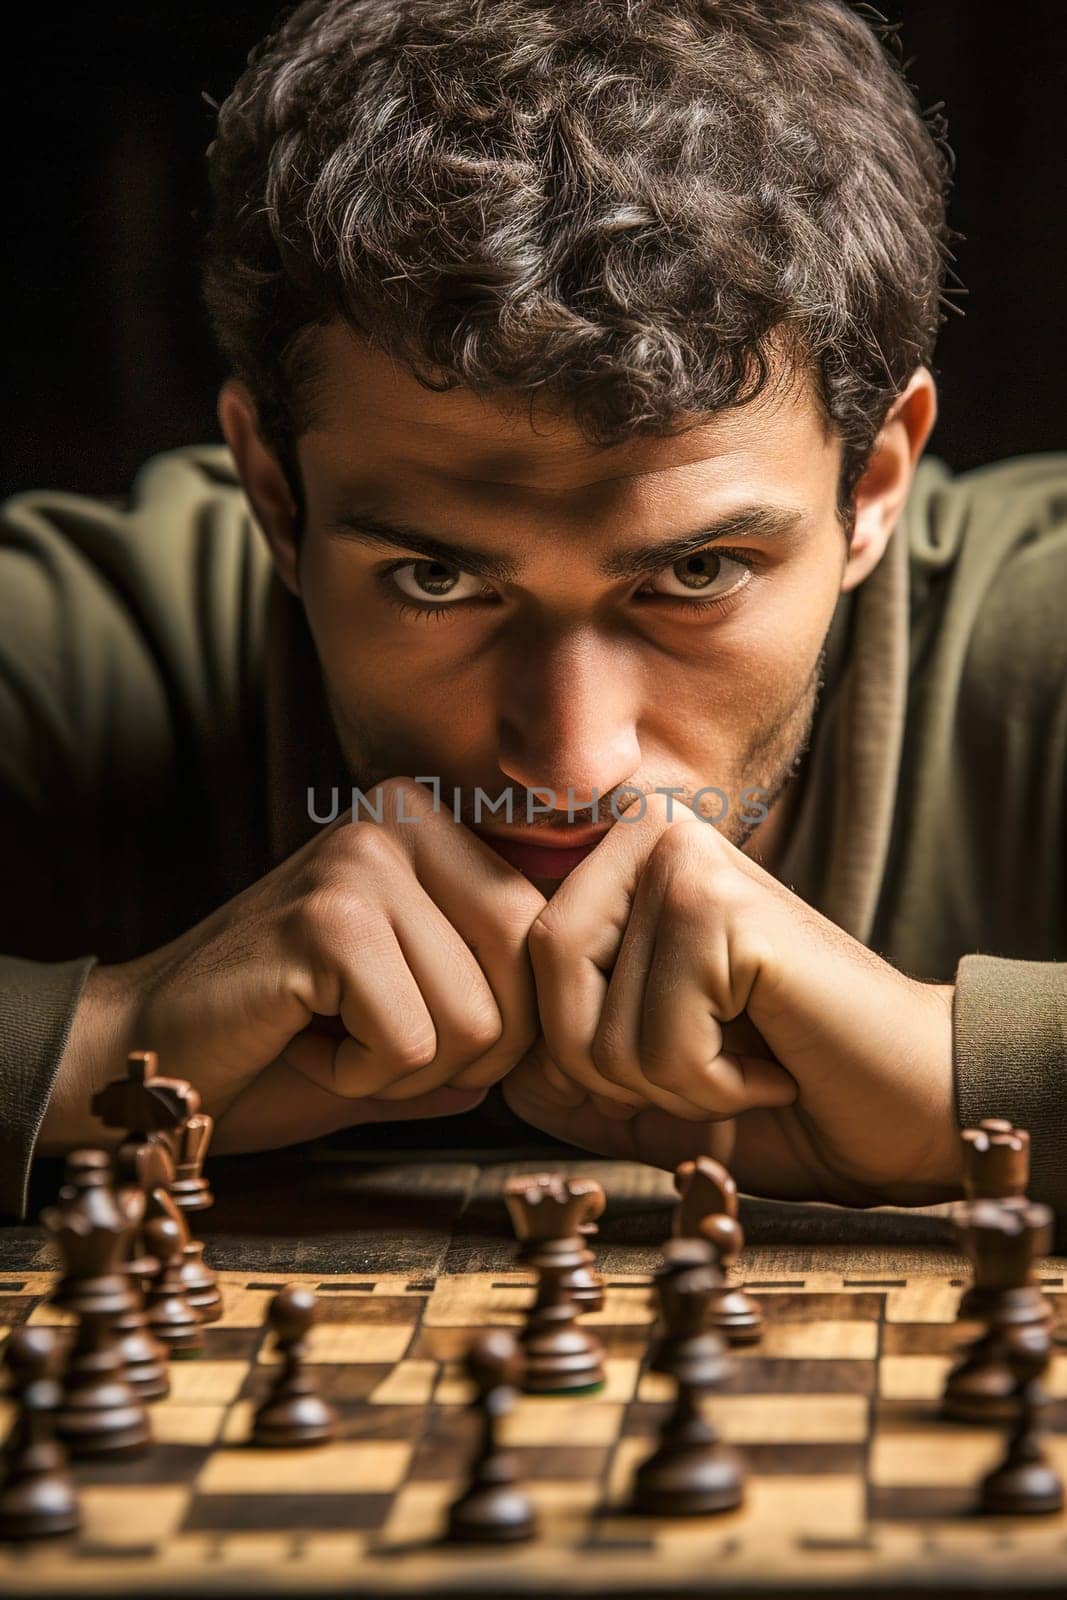 Portrait of a grown man playing chess. A serious look. Close-up